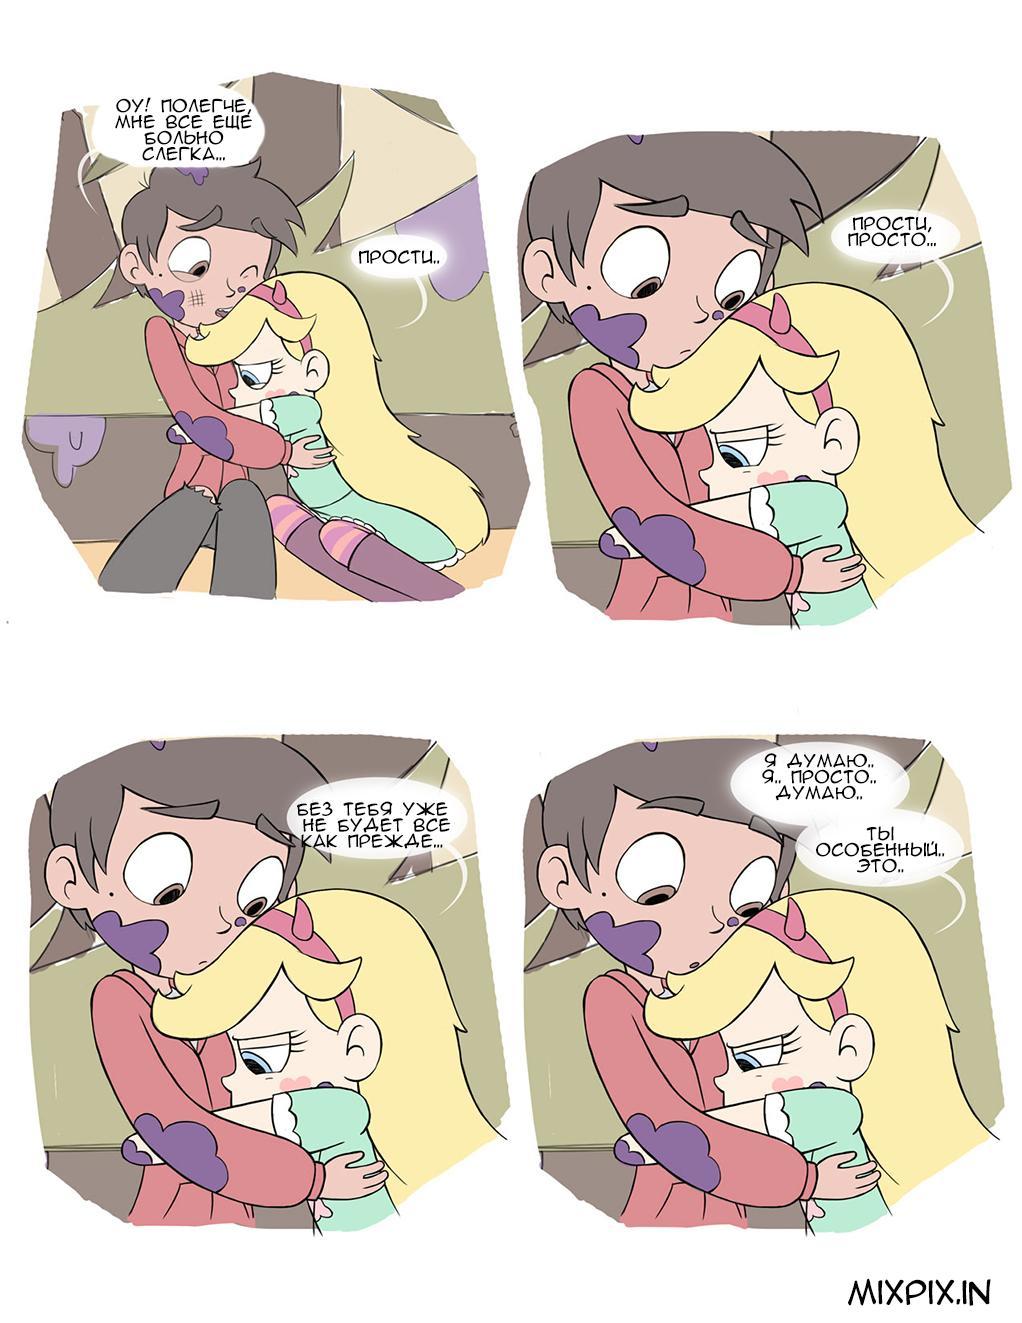 Star vs. the forces of evil Comic (Hard fight) StarMarko - Star vs Forces of Evil, Cartoons, Comics, Star butterfly, Marco diaz, Starco, Longpost